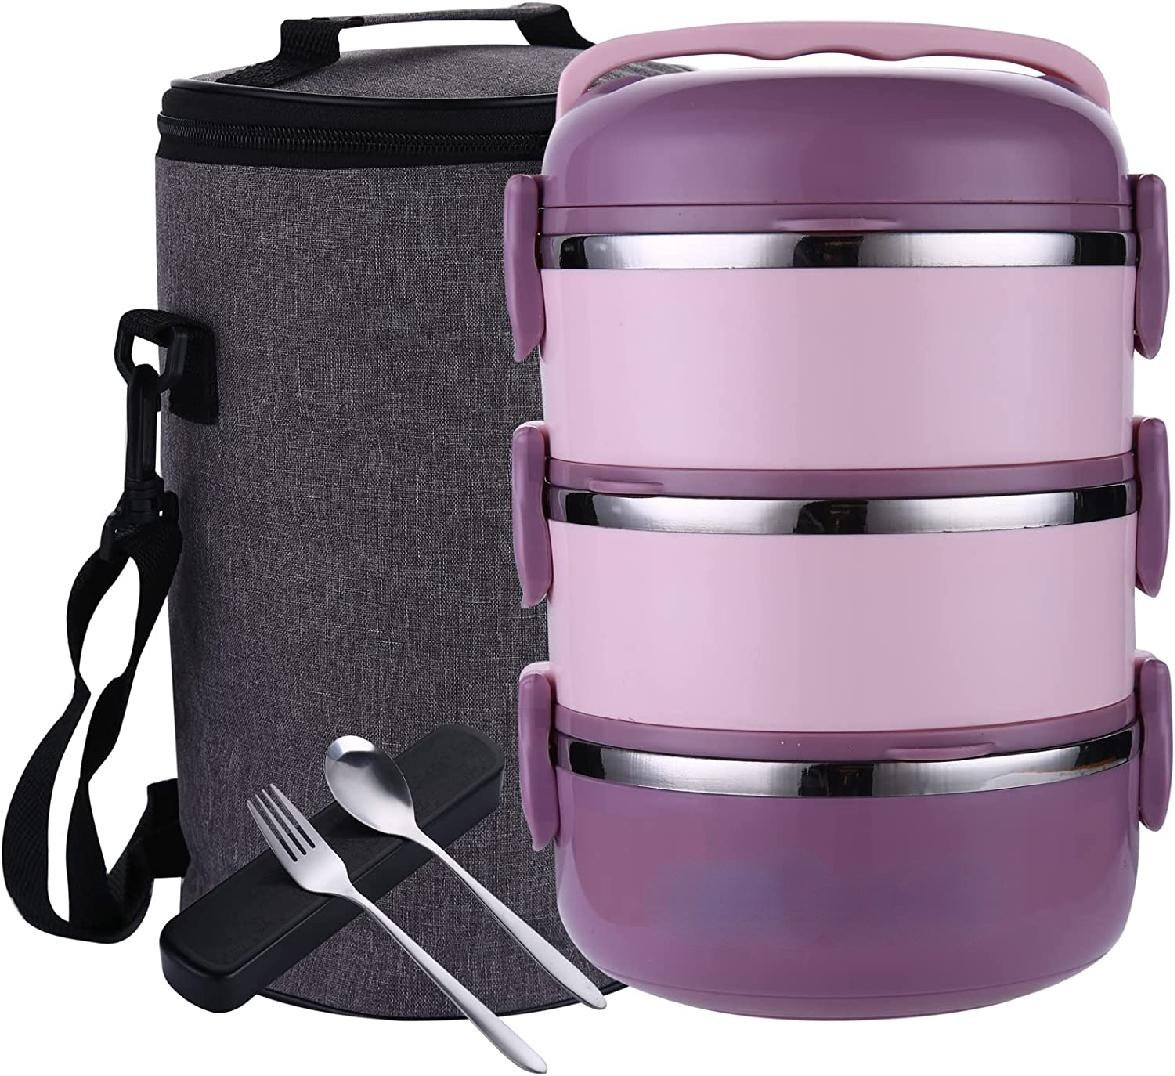 DaCool Kids Food Thermos 13.5 Ounce Lunch Box Adults Bento Box